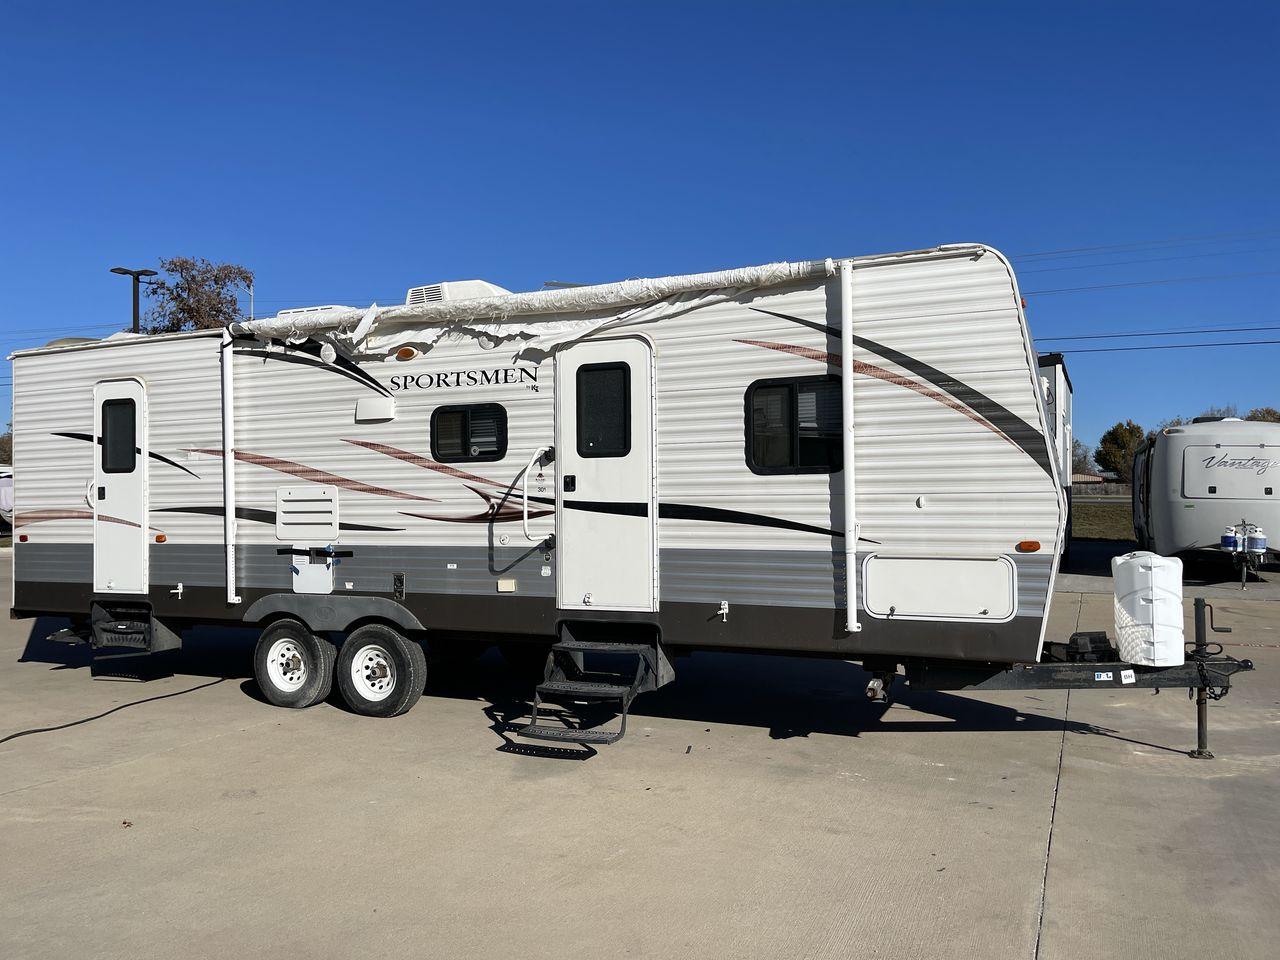 2013 WHITE KZ SPORTZMEN 301BH (4EZTS3029D5) , Length: 32.5 ft. | Dry Weight: 6,280 lbs. | Gross Weight: 8,000 lbs. | Slides: 1 transmission, located at 4319 N Main St, Cleburne, TX, 76033, (817) 678-5133, 32.385960, -97.391212 - Photo #22